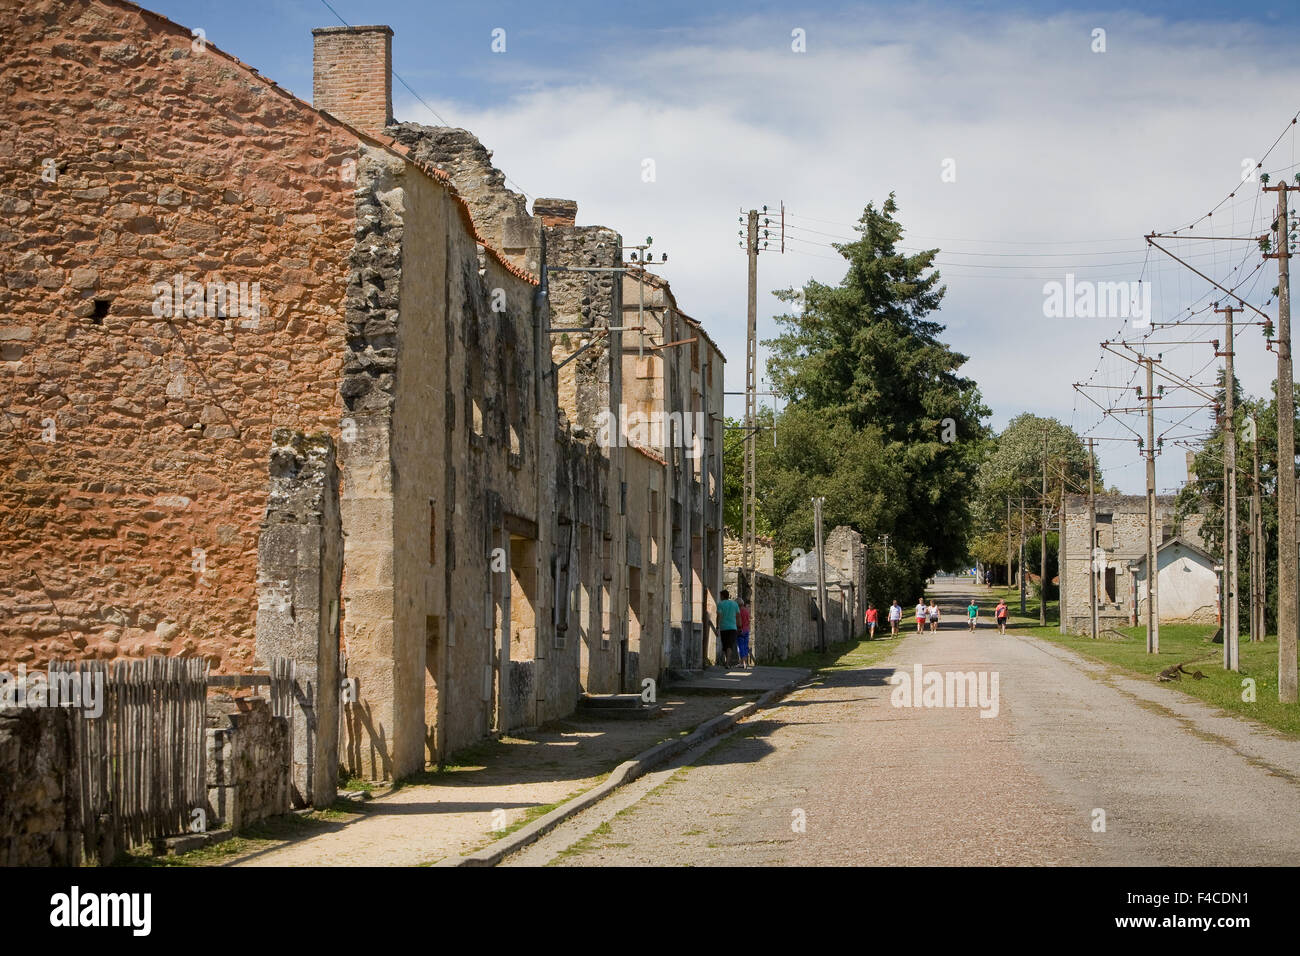 The ruined village of Oradour-Sur-Glane in France where 642 of its inhabitants, including women and children, were massacred Stock Photo